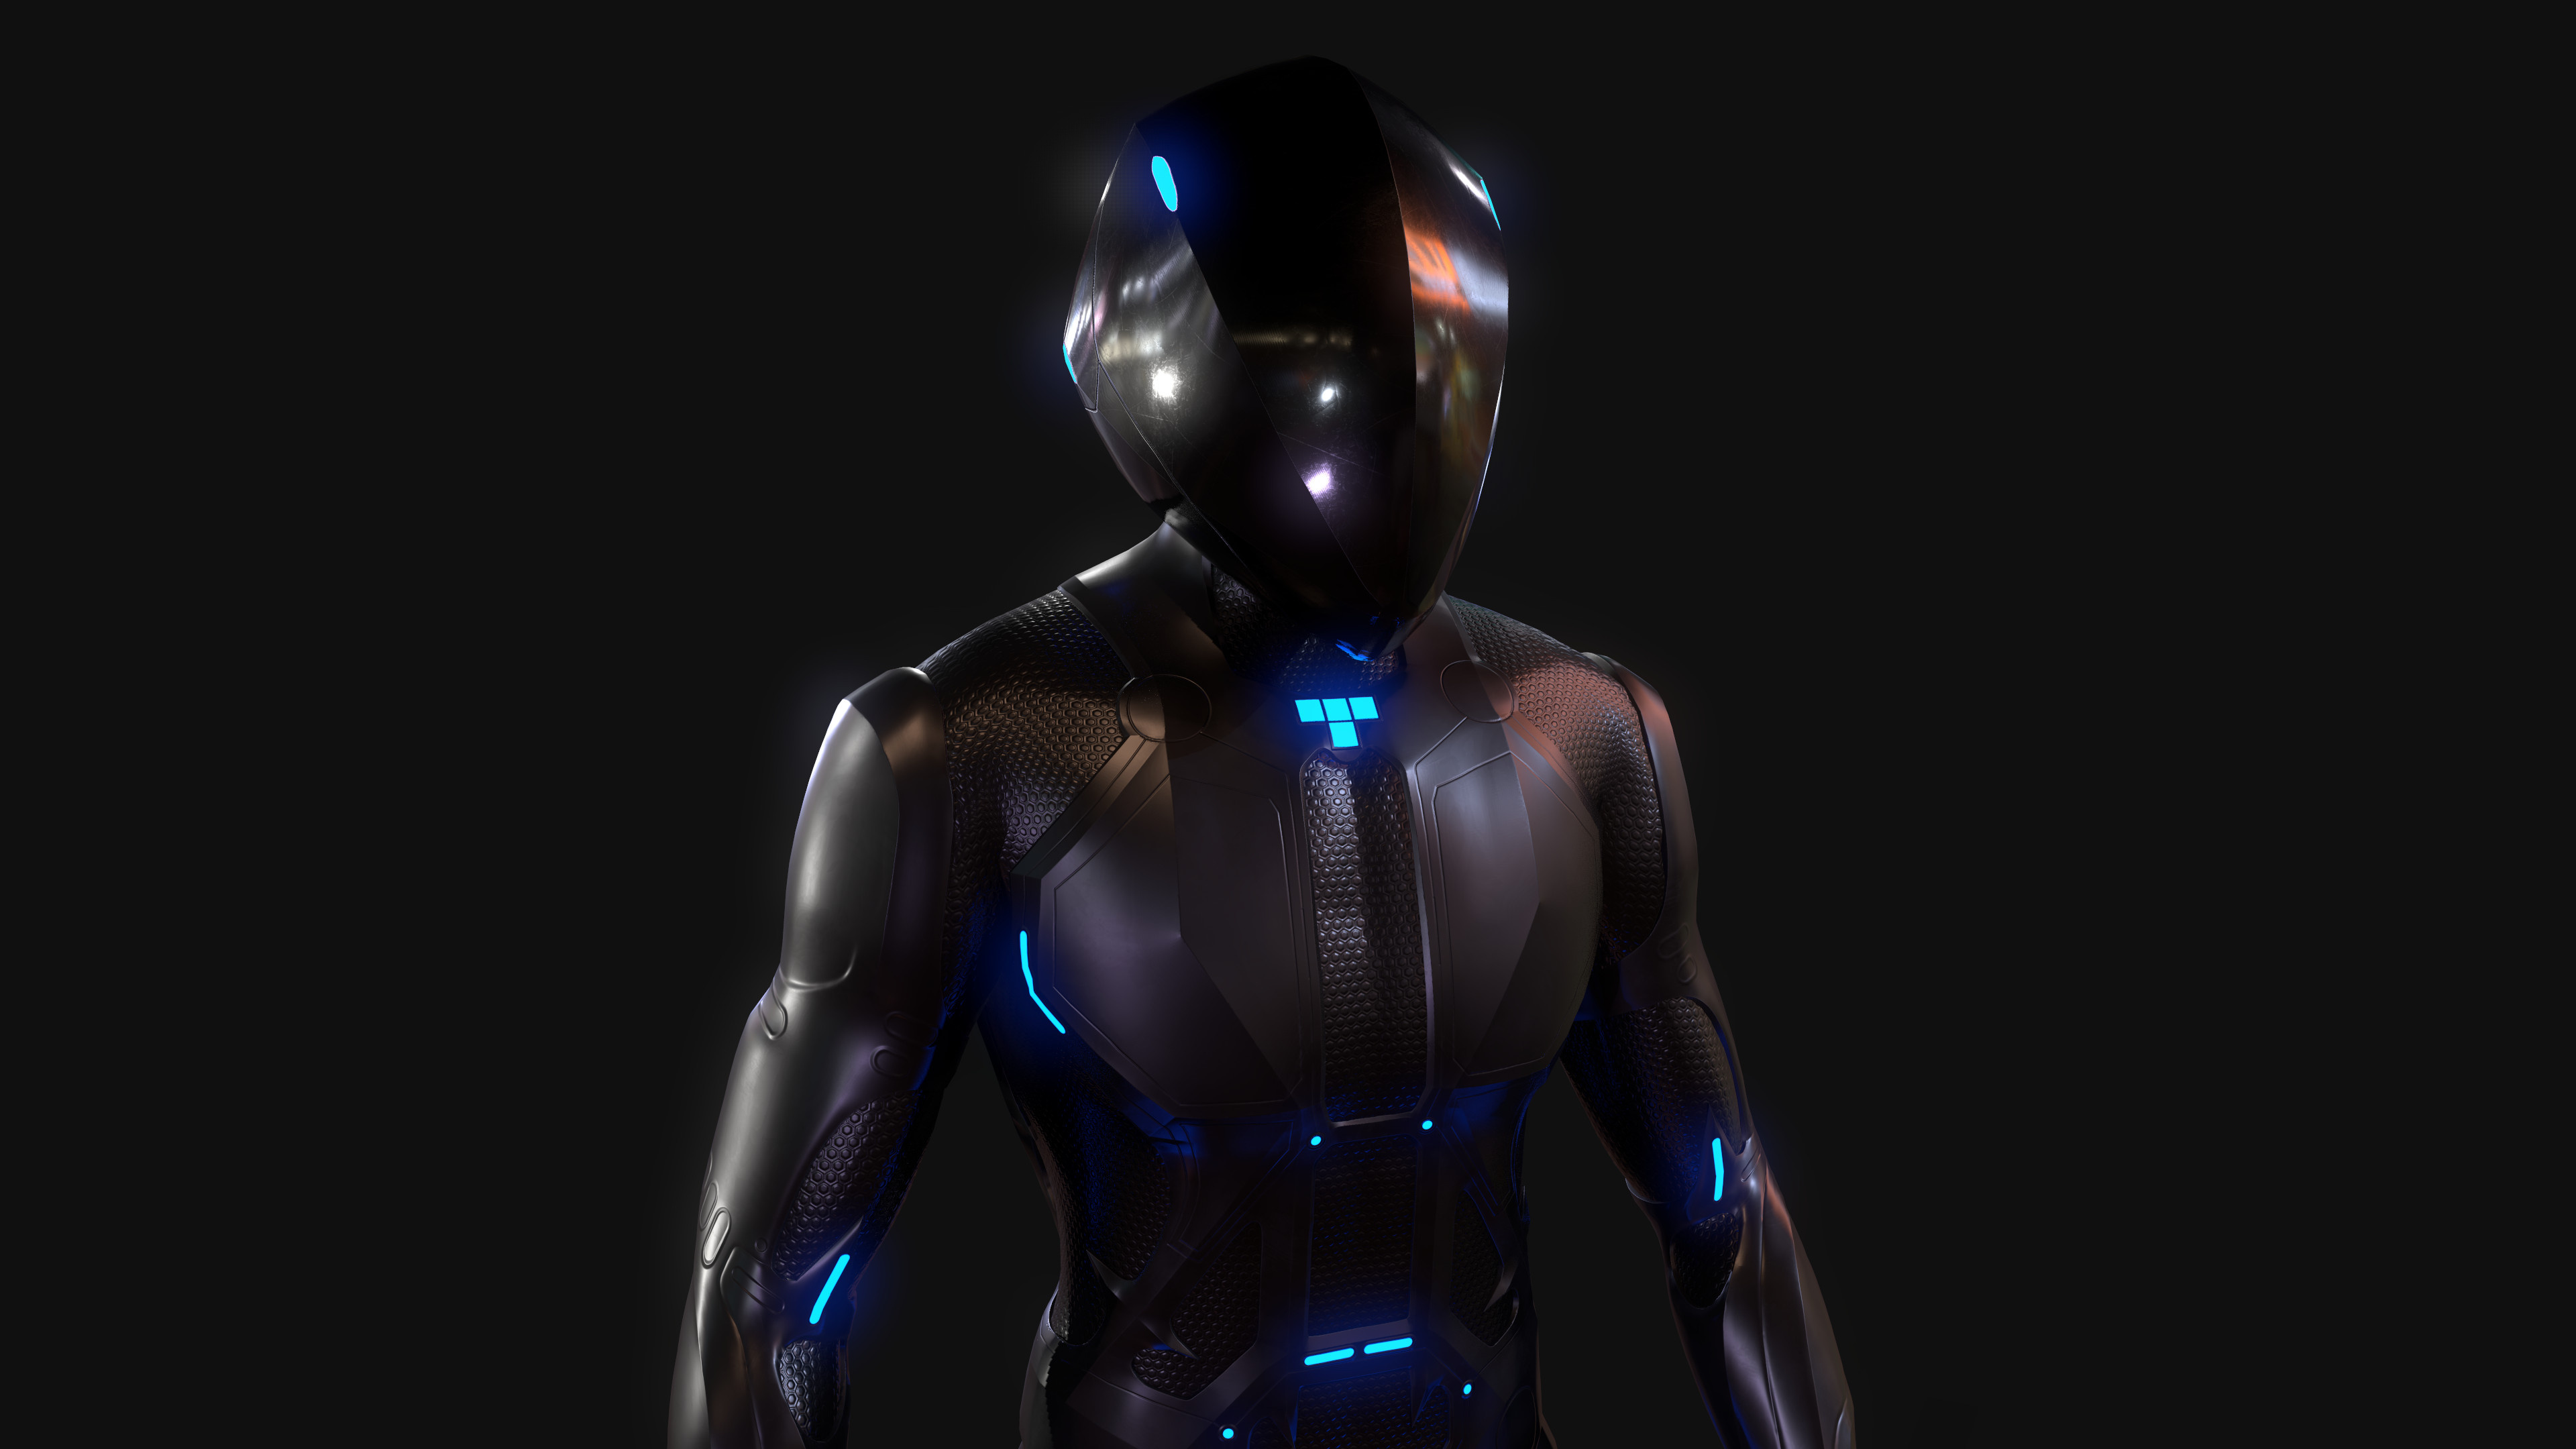 Tron (Movie): A 2010 American science fiction action film, Legacy. 3840x2160 4K Background.